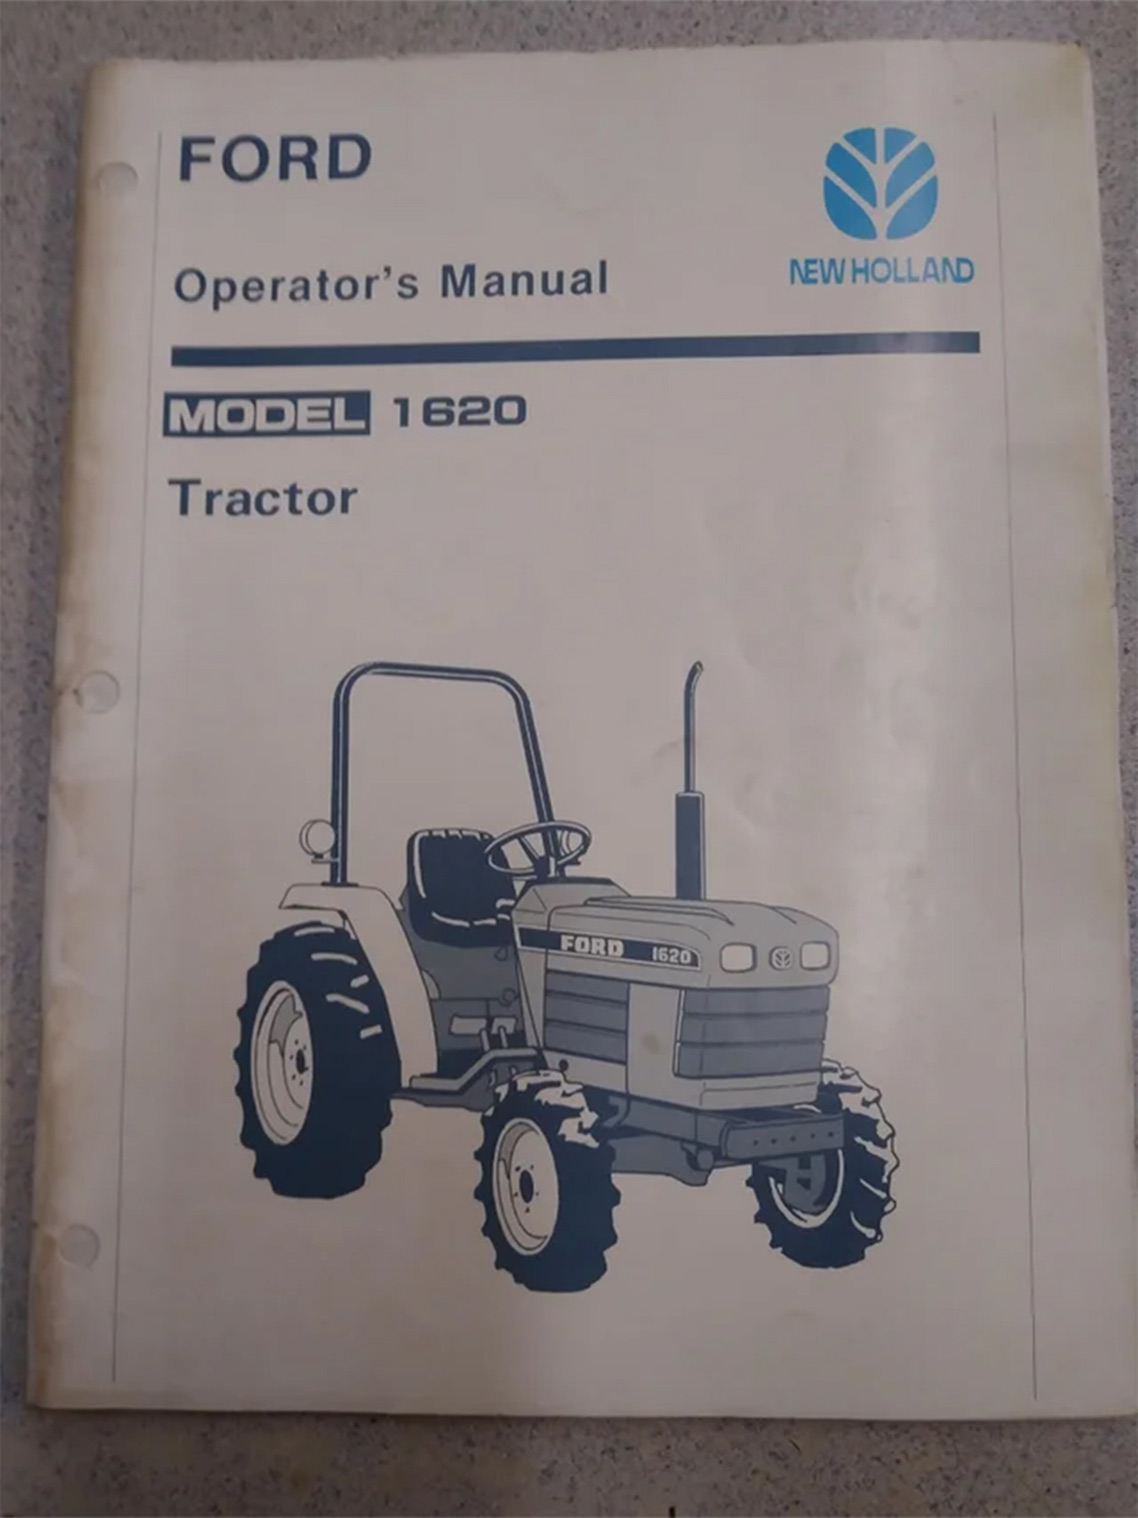 Ford 1620 Operator's Manual